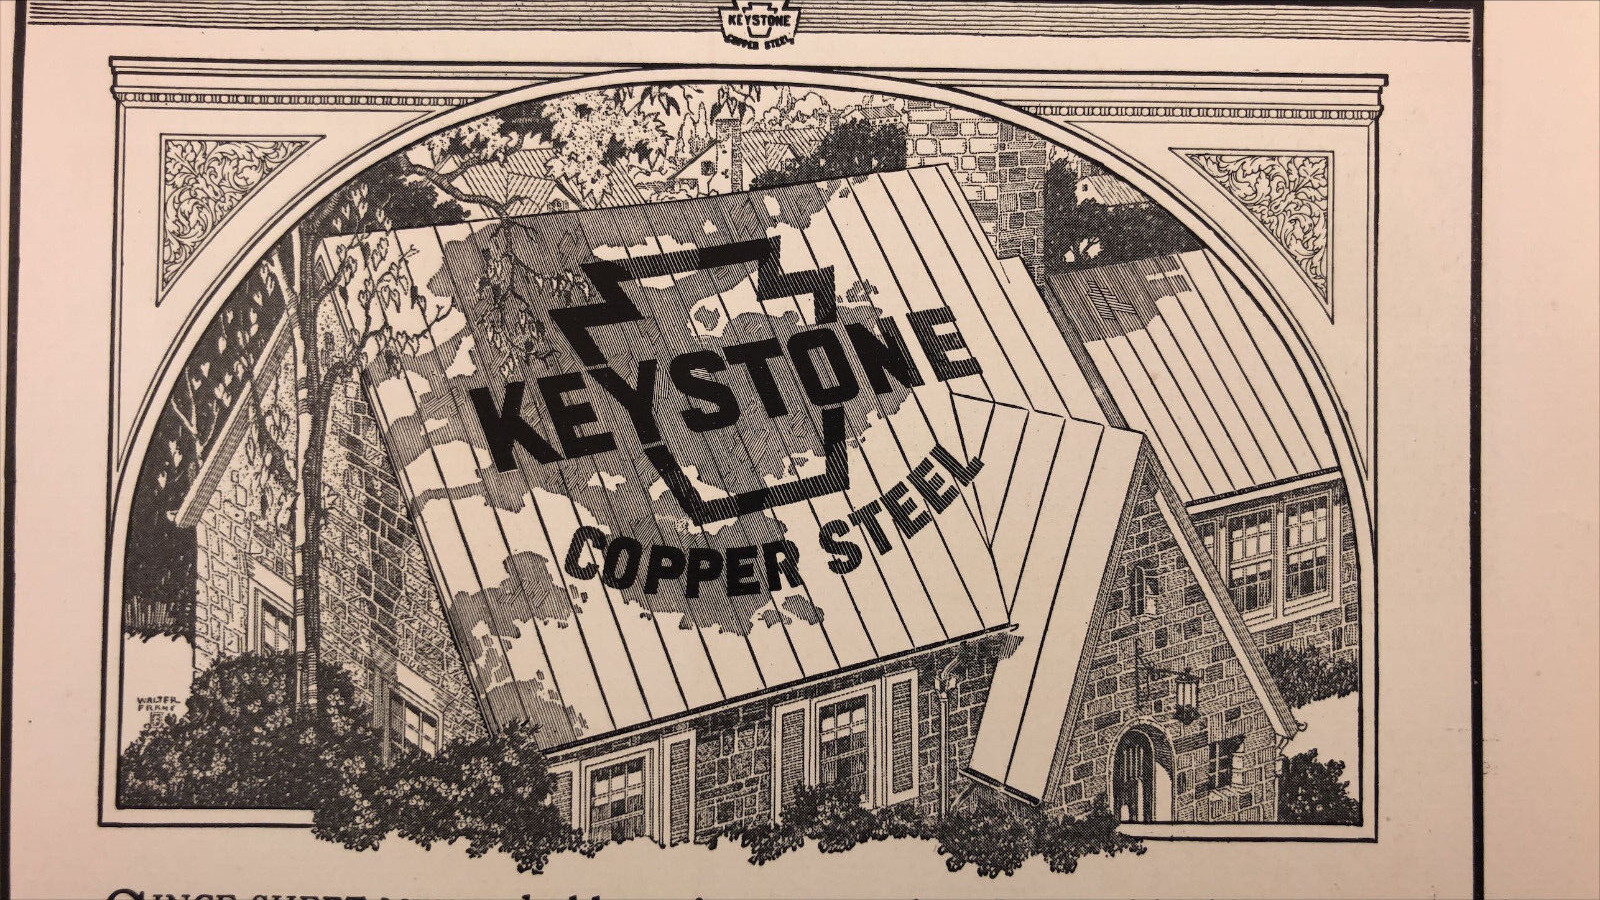 1926 Keystone Copper Steel Roofing Tin Plates Pittsburgh PA Vintage Print Ad